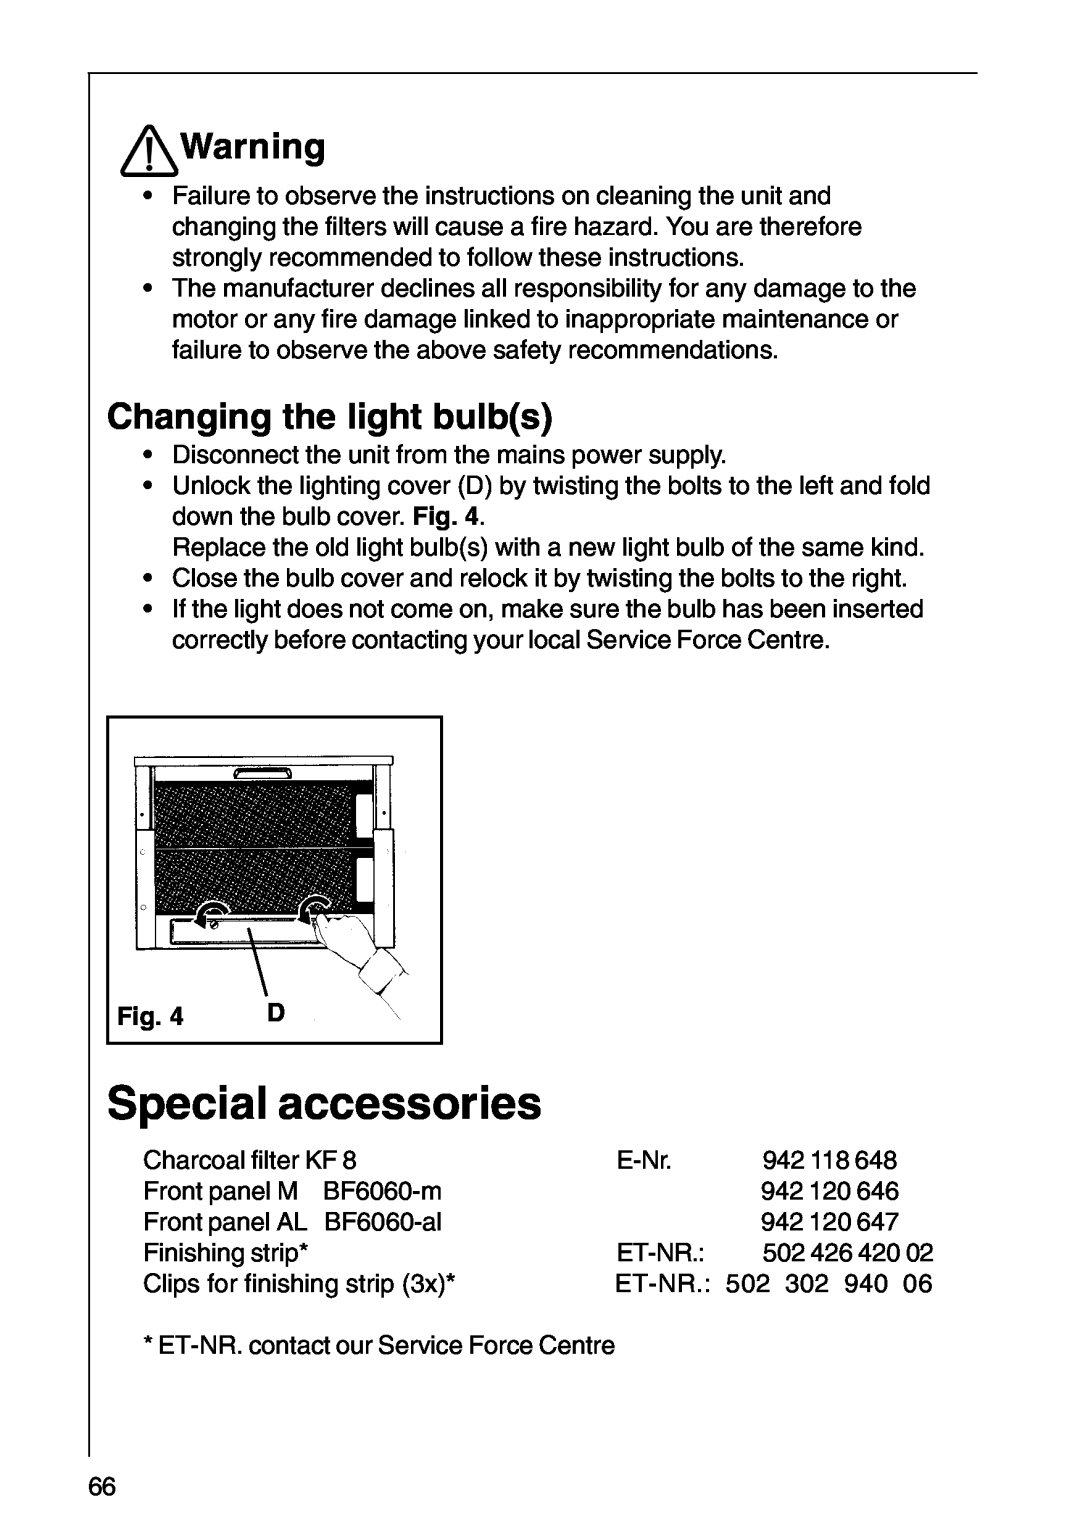 AEG CHDF 6260, DF 6160, DF6260-ML/1 installation instructions Special accessories, Changing the light bulbs 